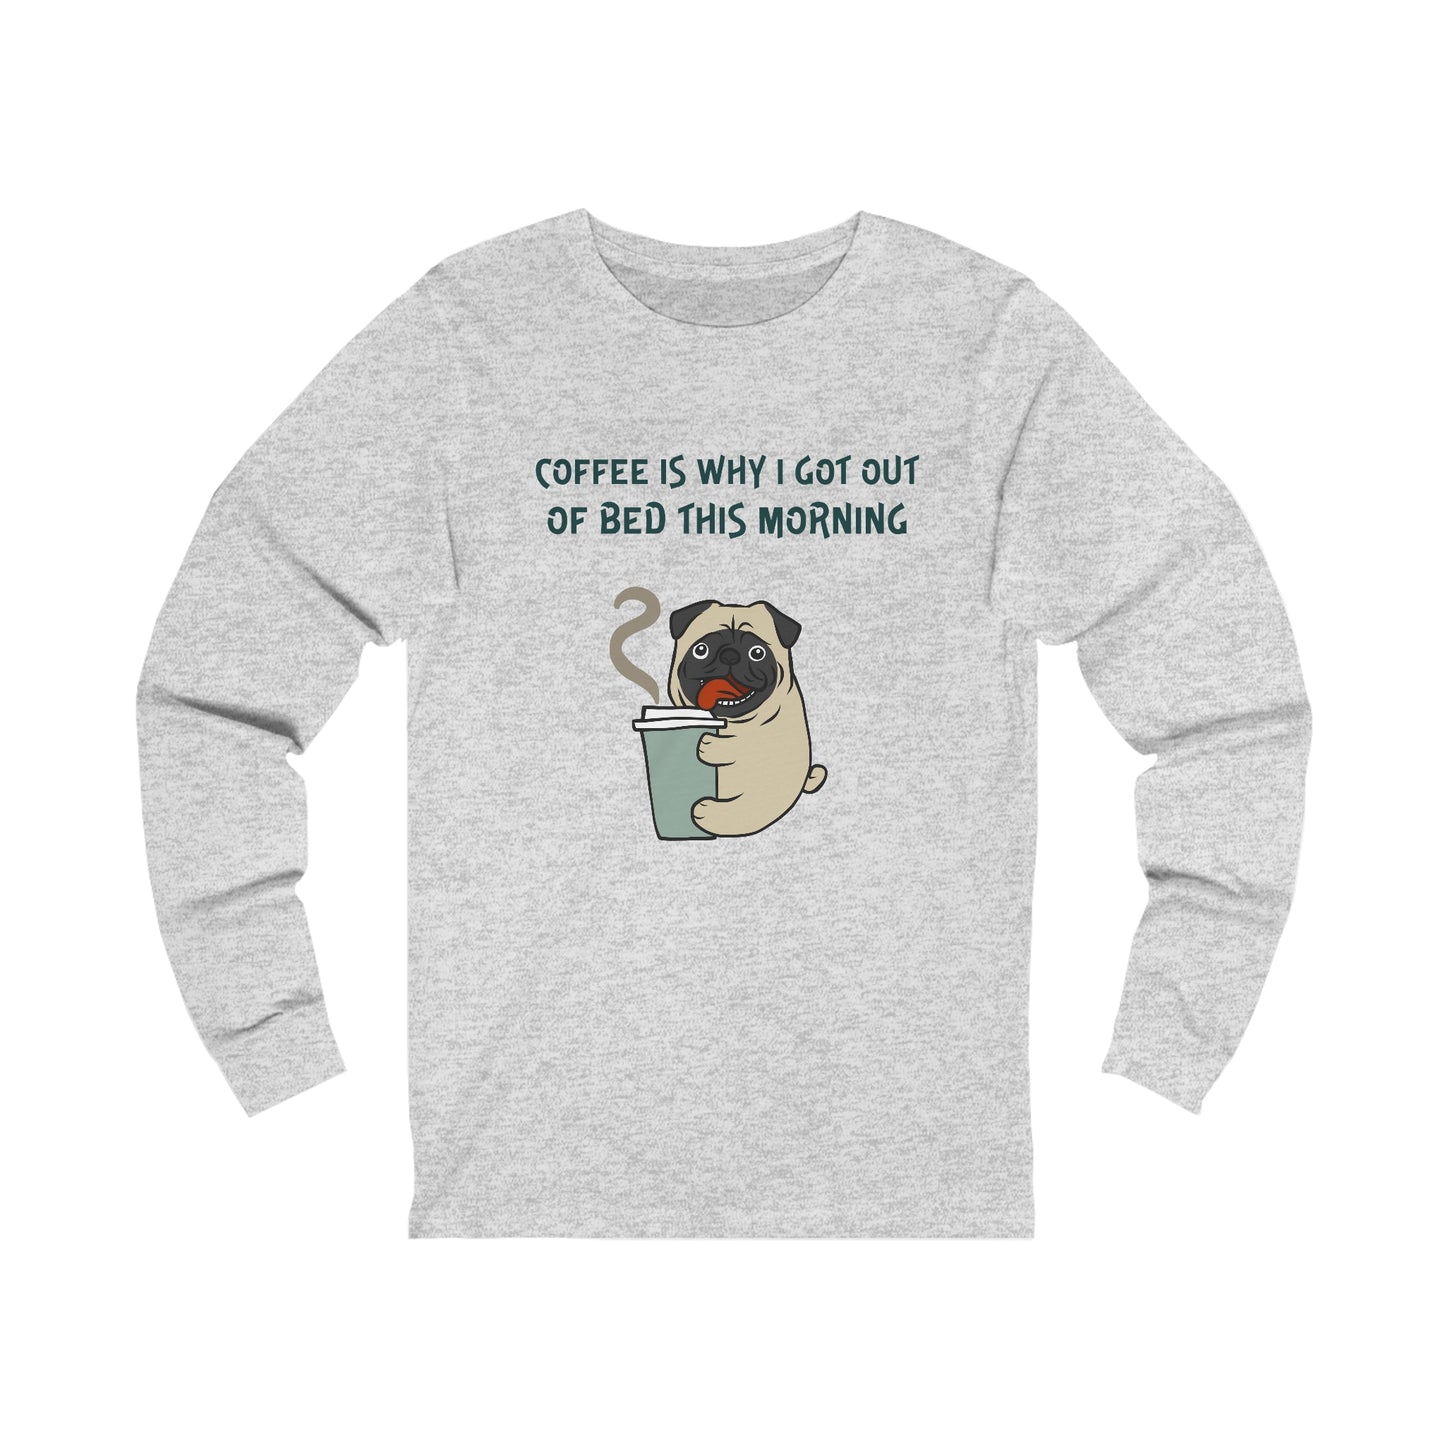 Pete The Bull Dog. Coffee is Why I got out of Bed this Morning. Unisex Jersey Long Sleeve Tee